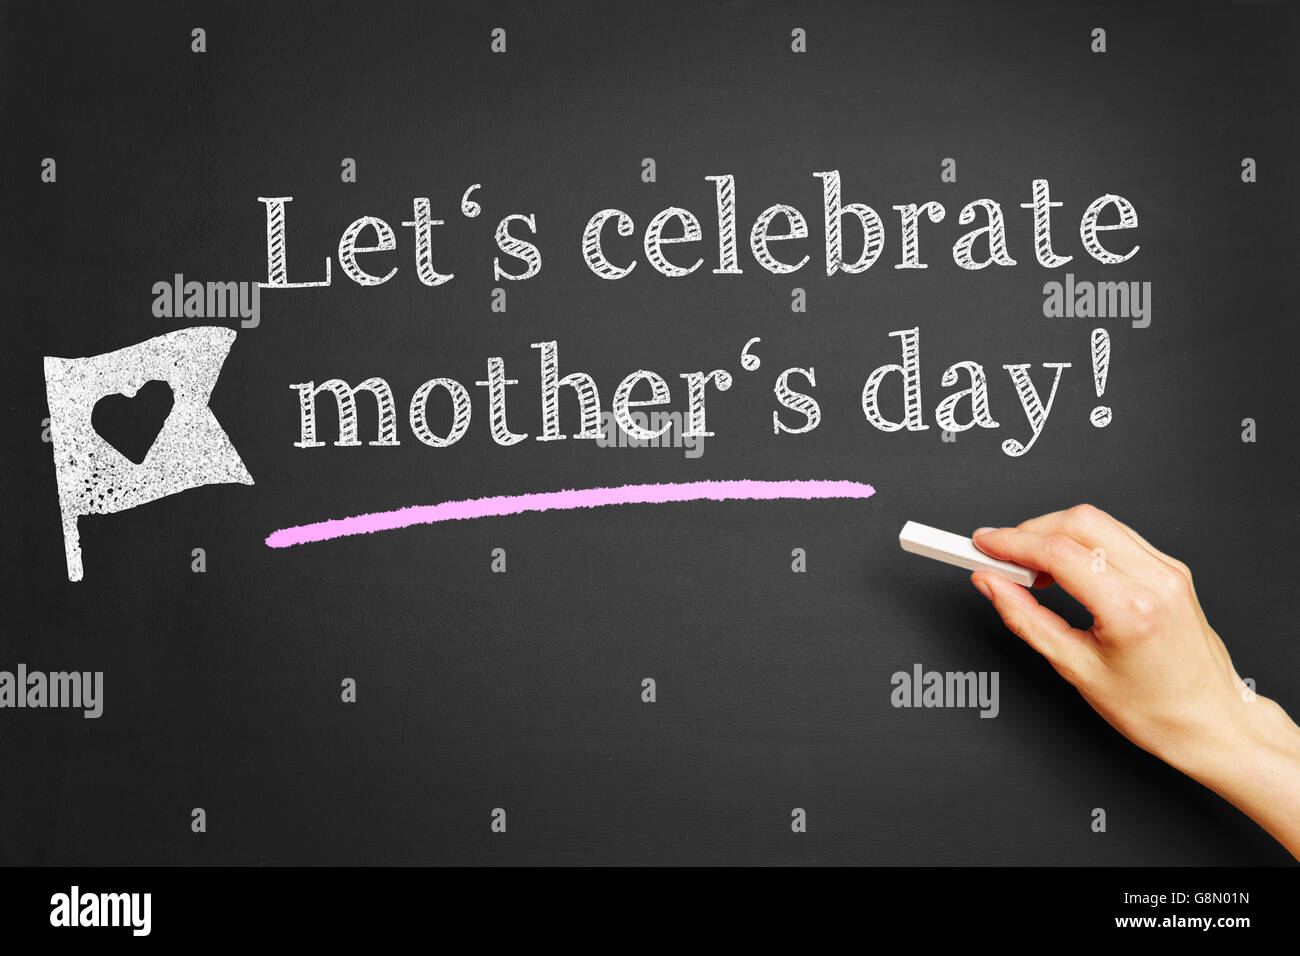 Hand with chalk writing 'Let's celebrate mother's day!' on a blackboard Stock Photo